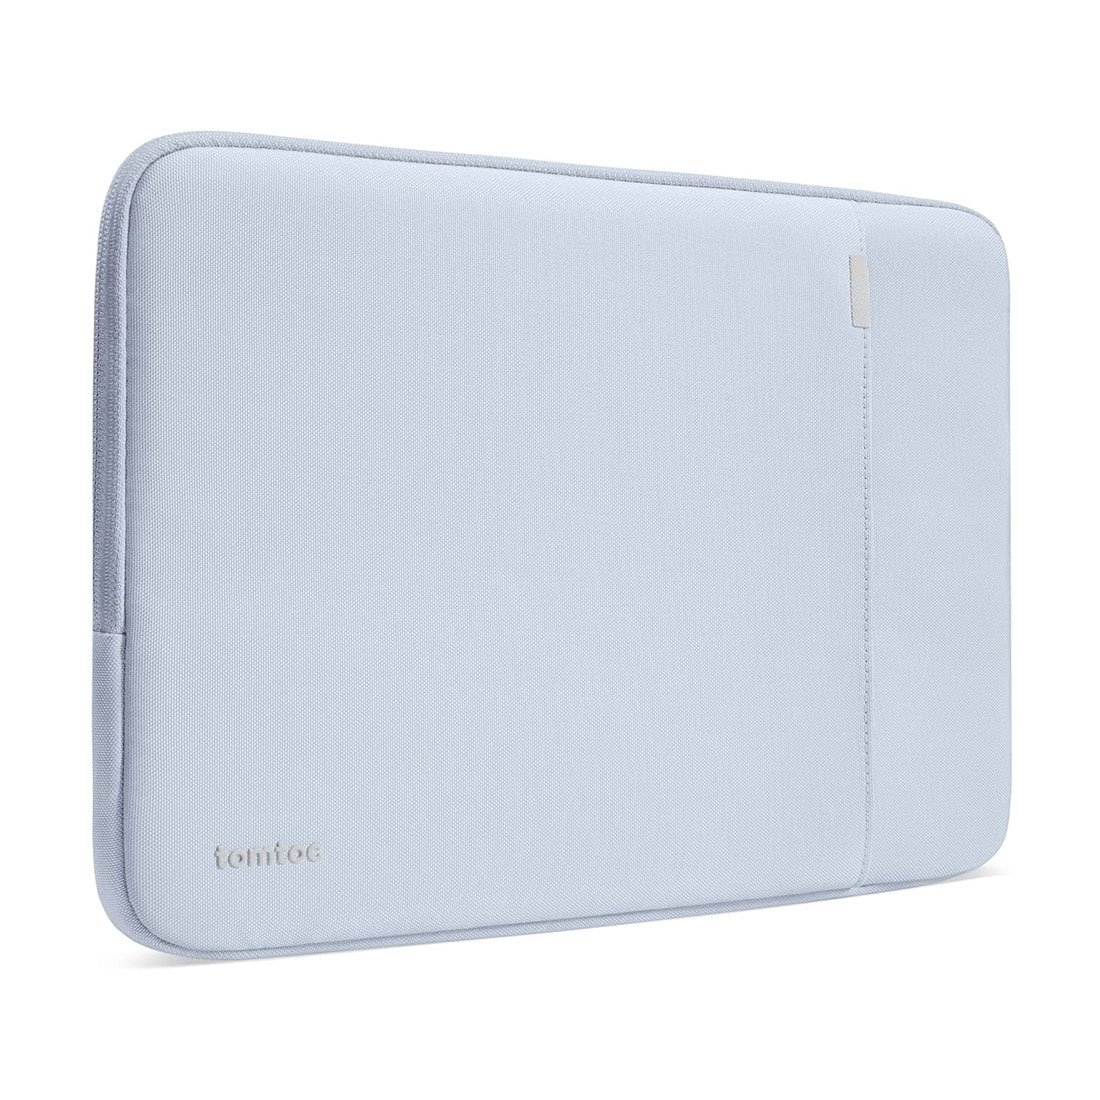 Tomtoc puzdro 360 Protective Sleeve pre Macbook Air/Pro 13" 2020 - Mist Blue